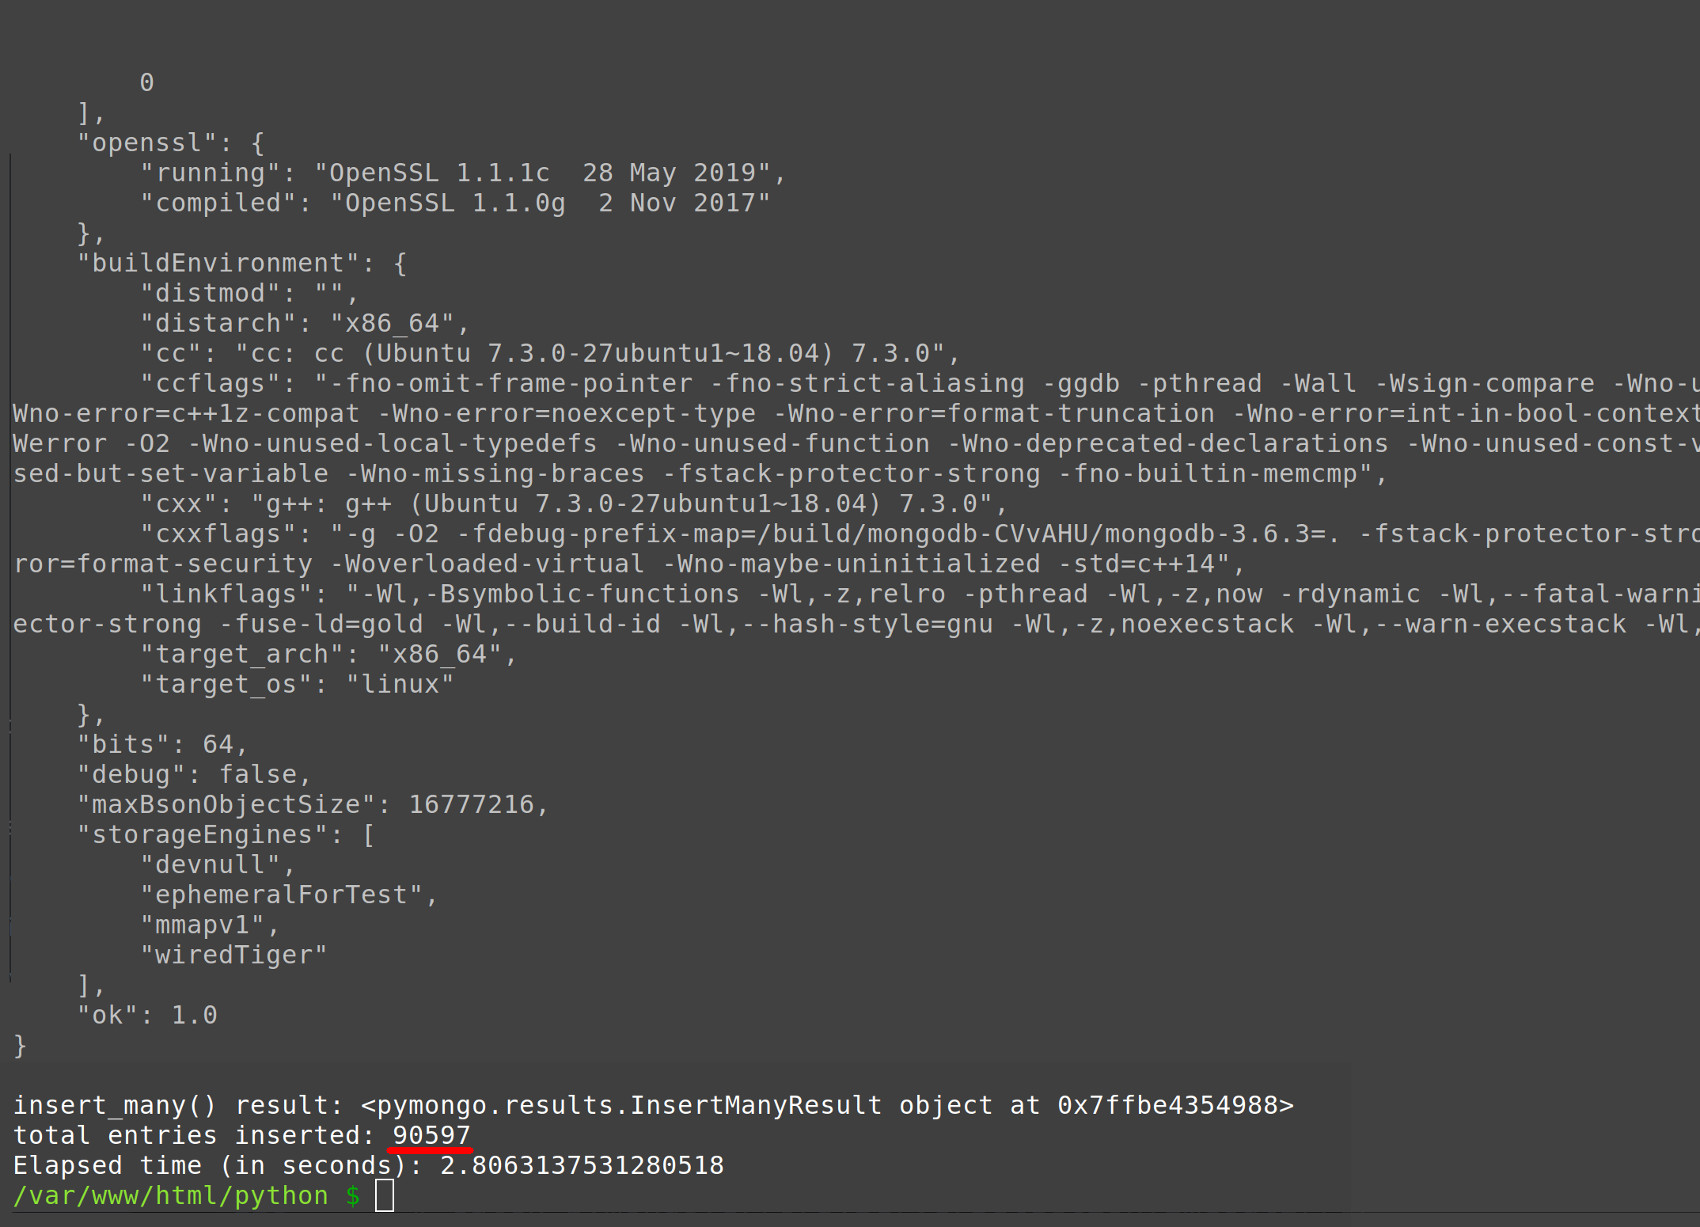 Screenshot of the Python script printing the number of MongoDB documents inserted